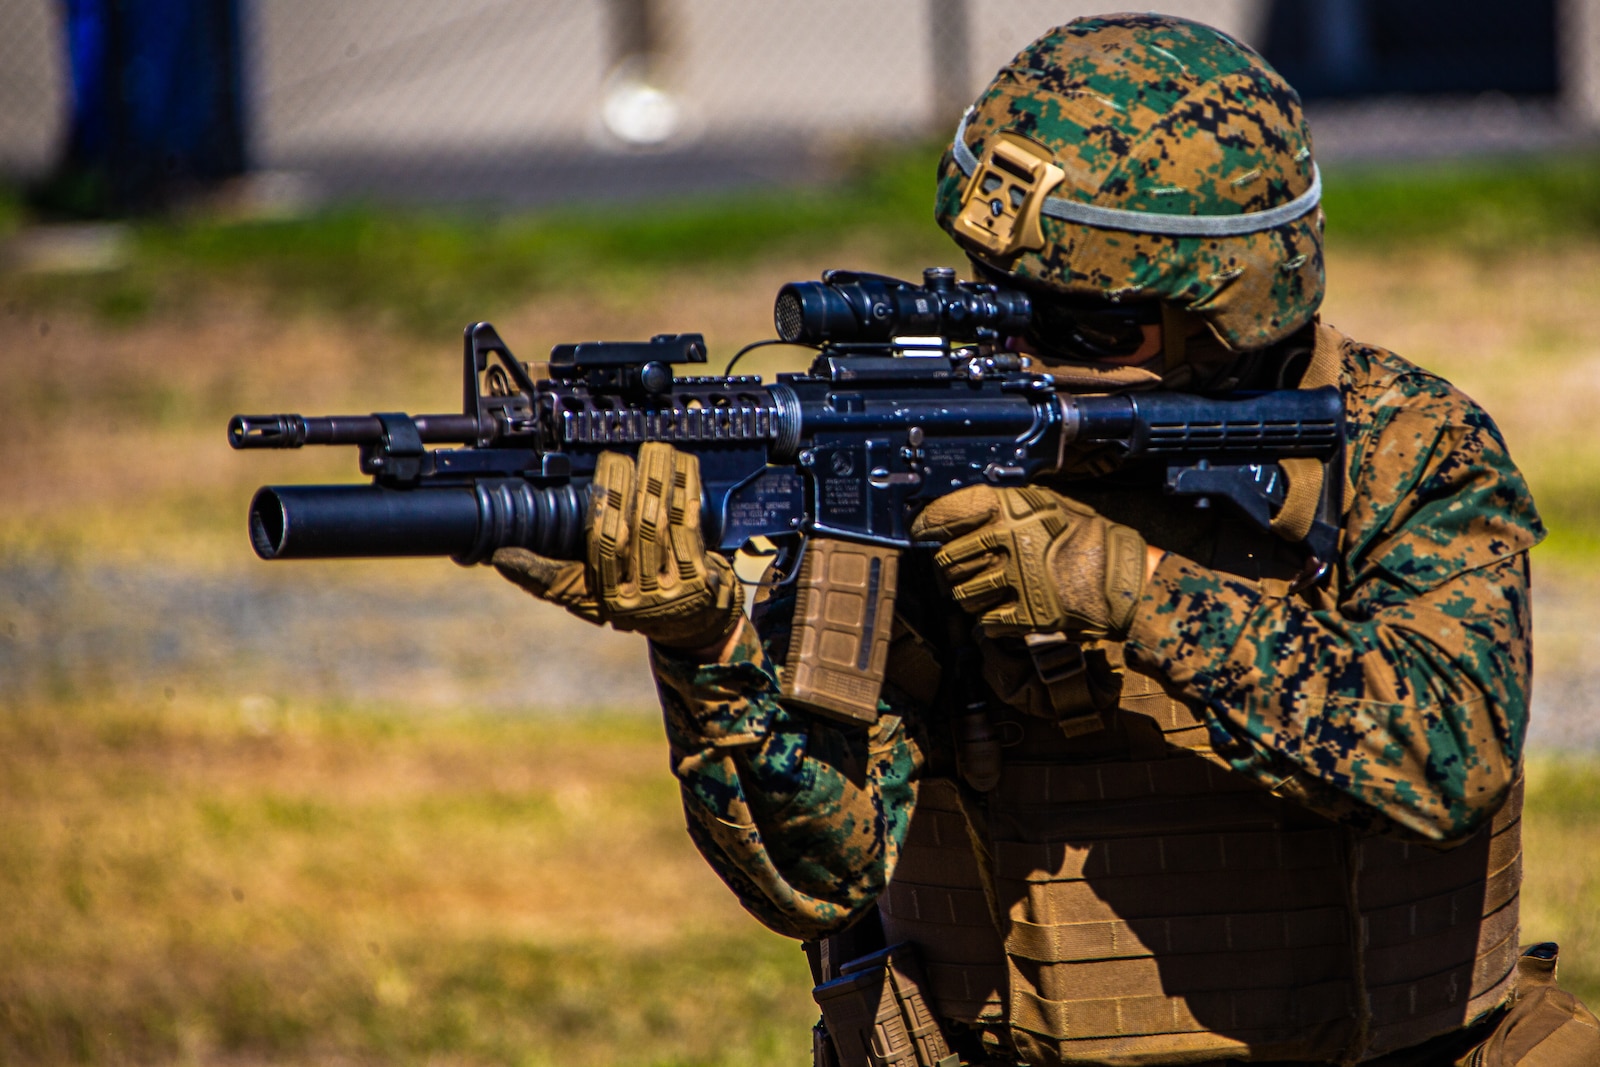 A U.S. Marine with Company F, 2nd Battalion, 3rd Marine Regiment, tactically moves while on patrol during Exercise Bougainville I on Marine Corps Base Hawaii, Aug. 19, 2020. Bougainville I is designed to train and evaluate team leaders in small unit proficiency and increase the Battalion’s combat readiness. (U.S. Marine Corps photo by Cpl. Jacob Wilson)